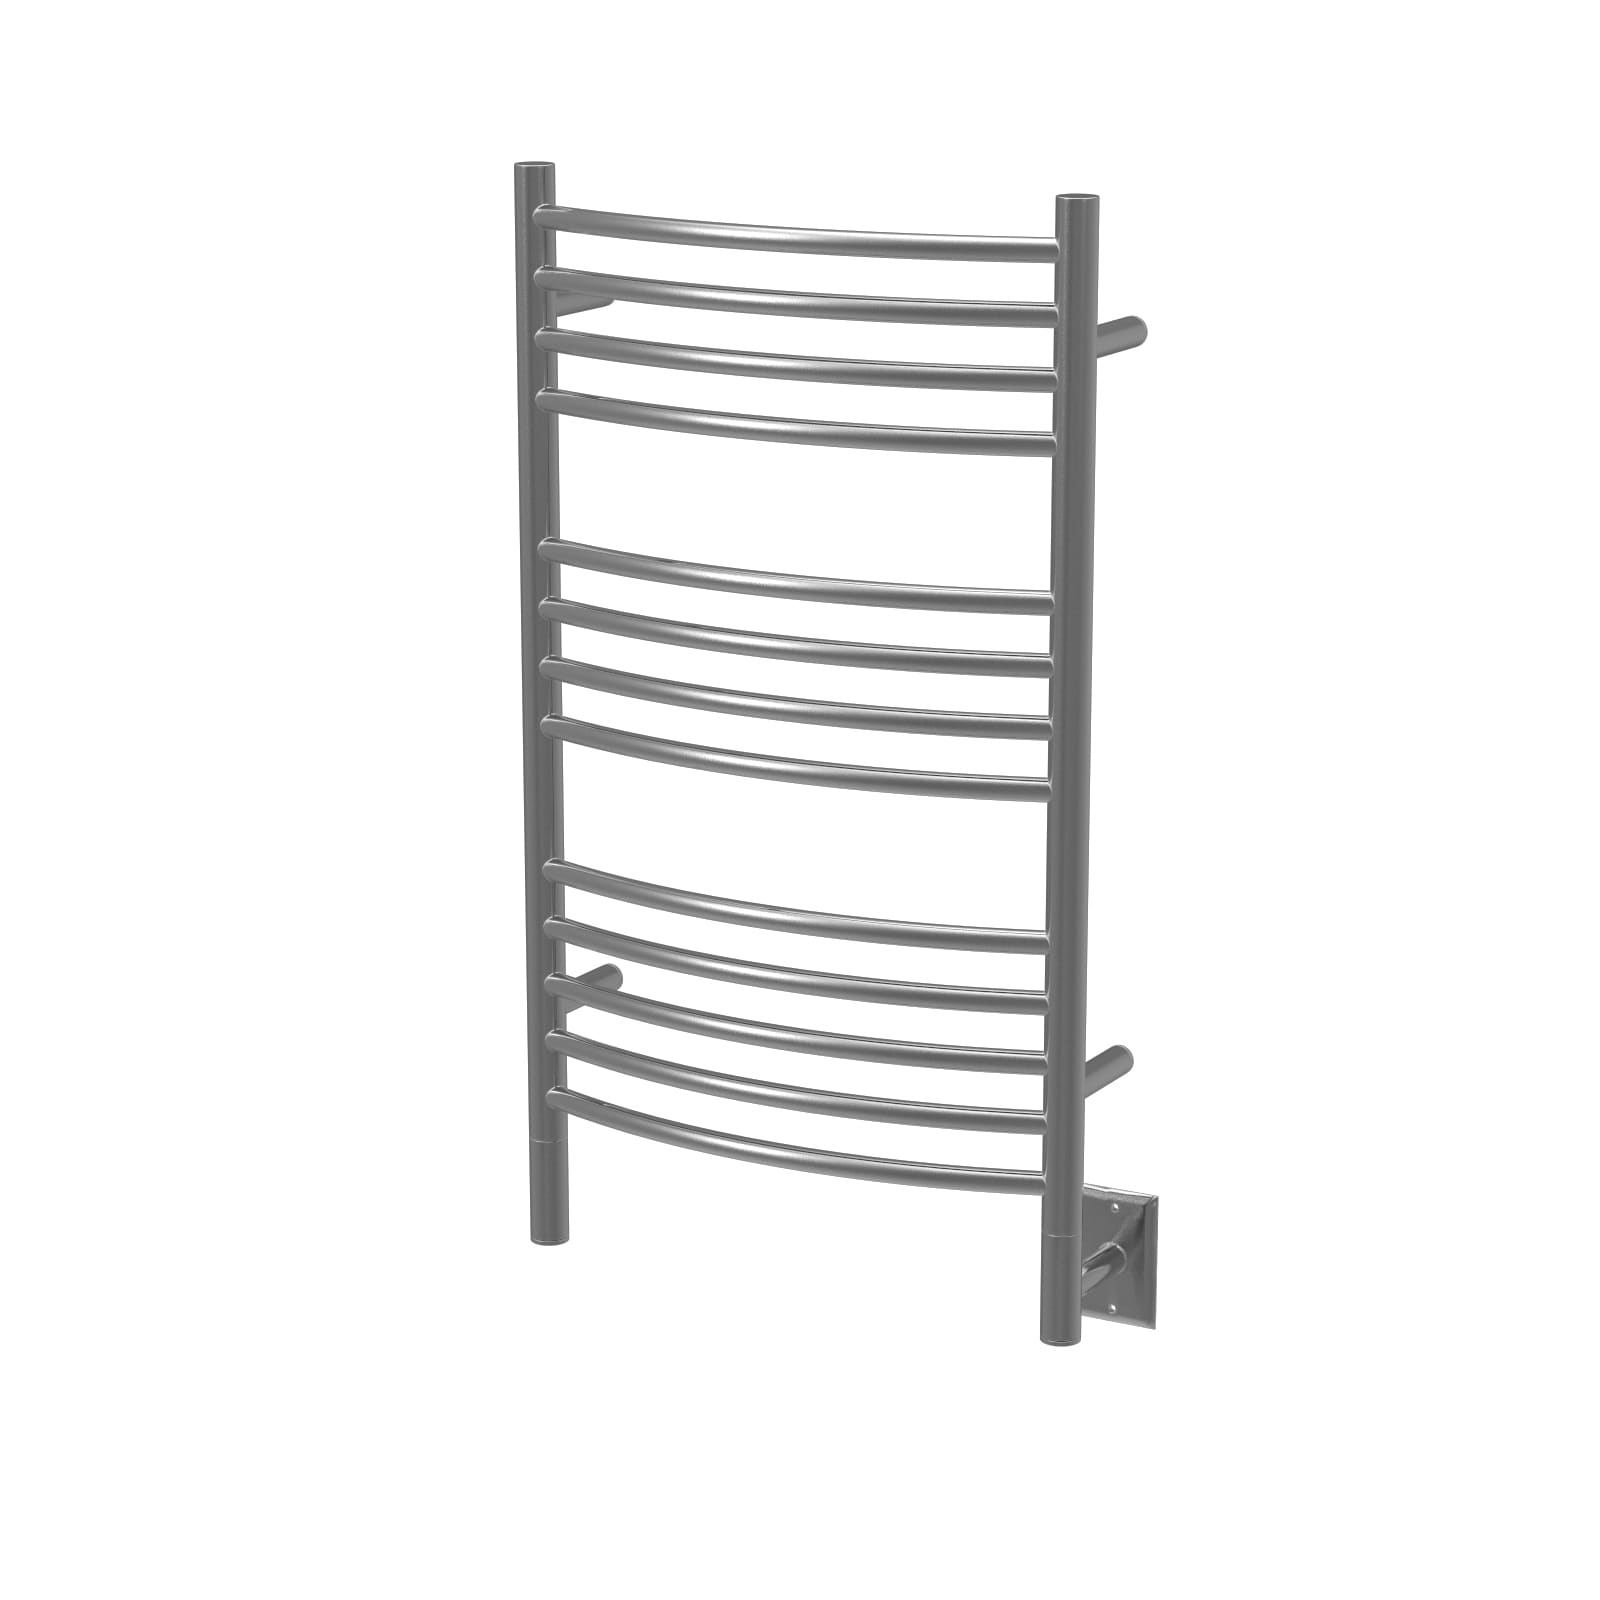 Amba, Amba Jeeves CCB Towel Warmer with 13 Curved Bars, Brushed Finish